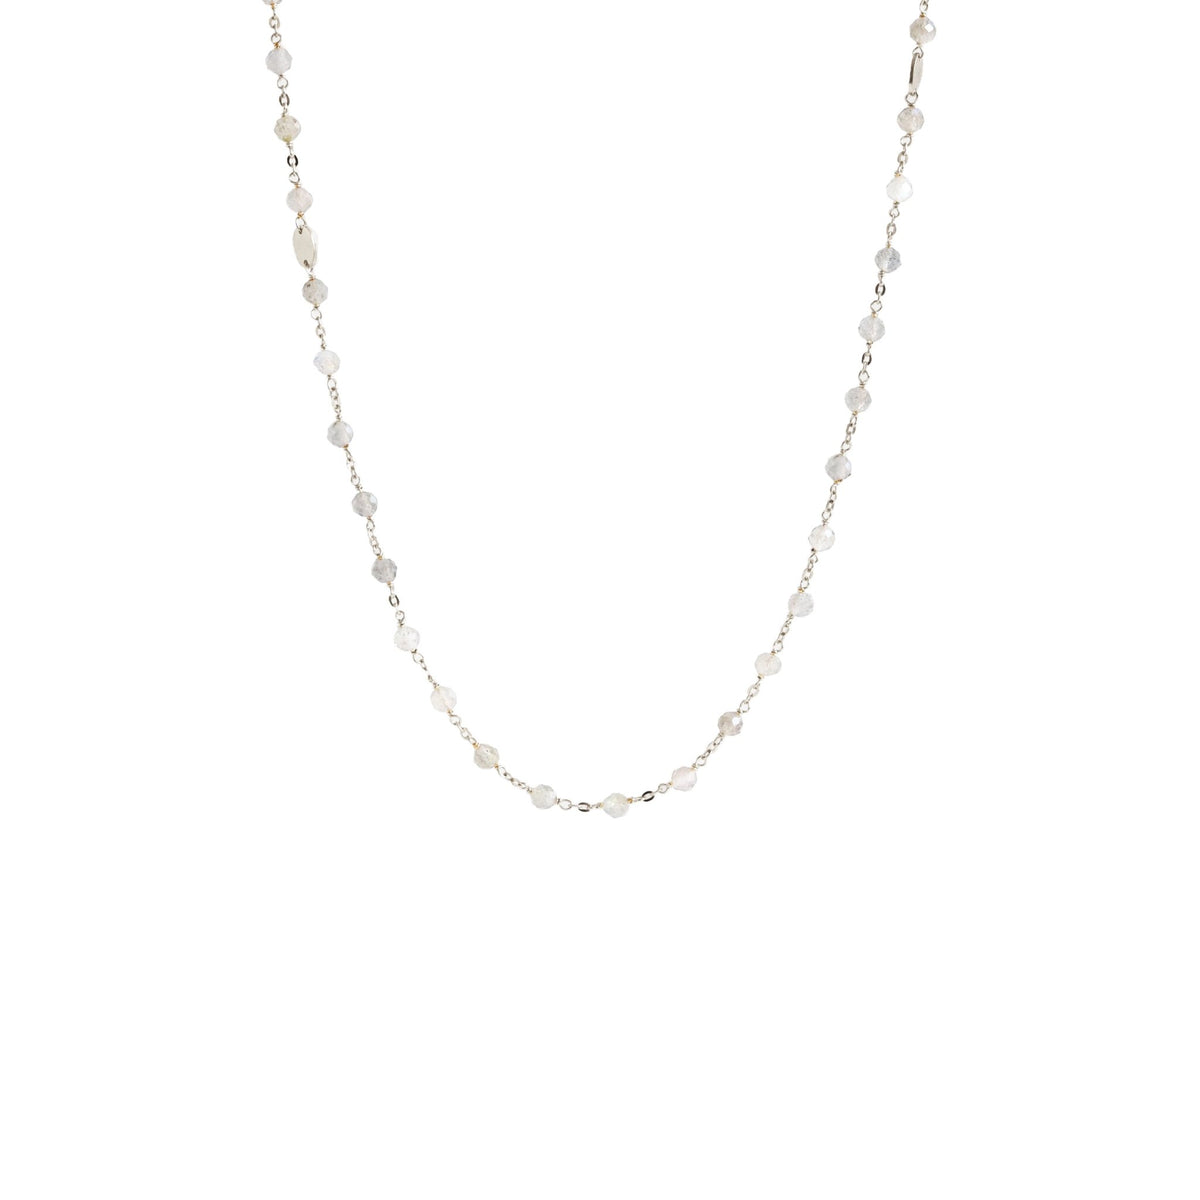 ICONIC MIDI BEADED NECKLACE - RAINBOW MOONSTONE &amp; SILVER 24-25&quot; - SO PRETTY CARA COTTER